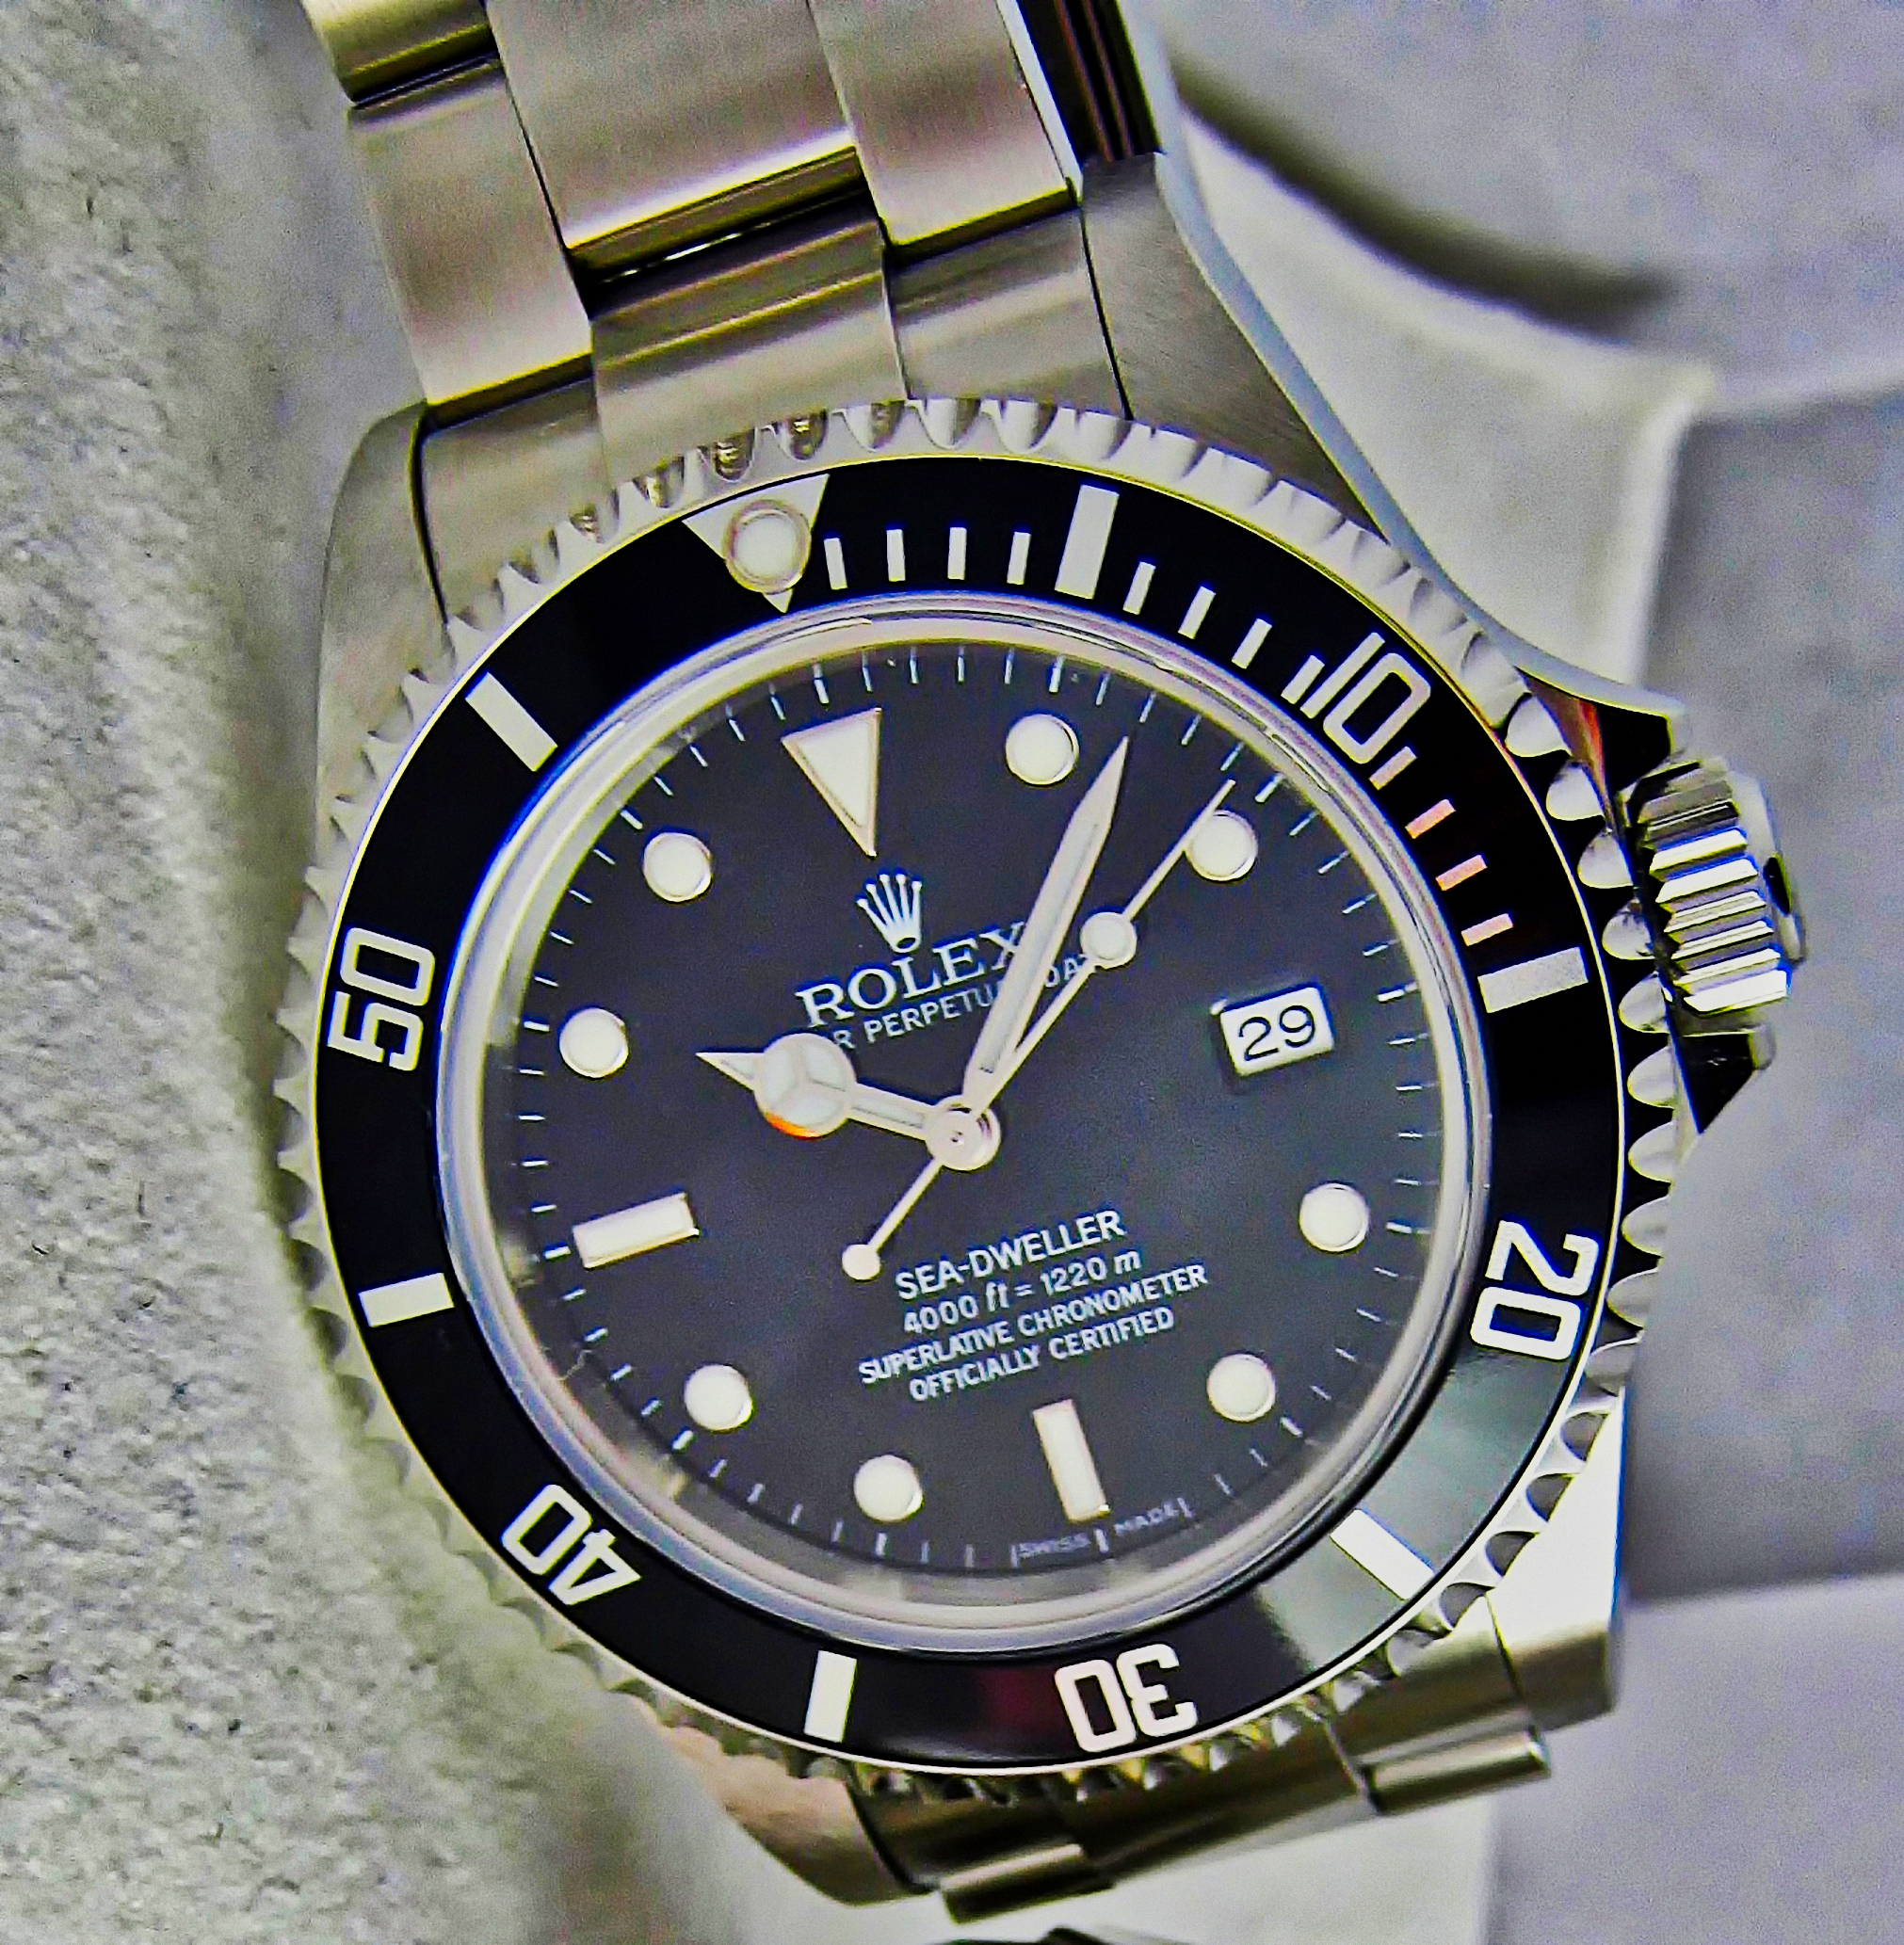 Wise Decisions: Making Informed Choices When Purchasing an Original Rolex Watch